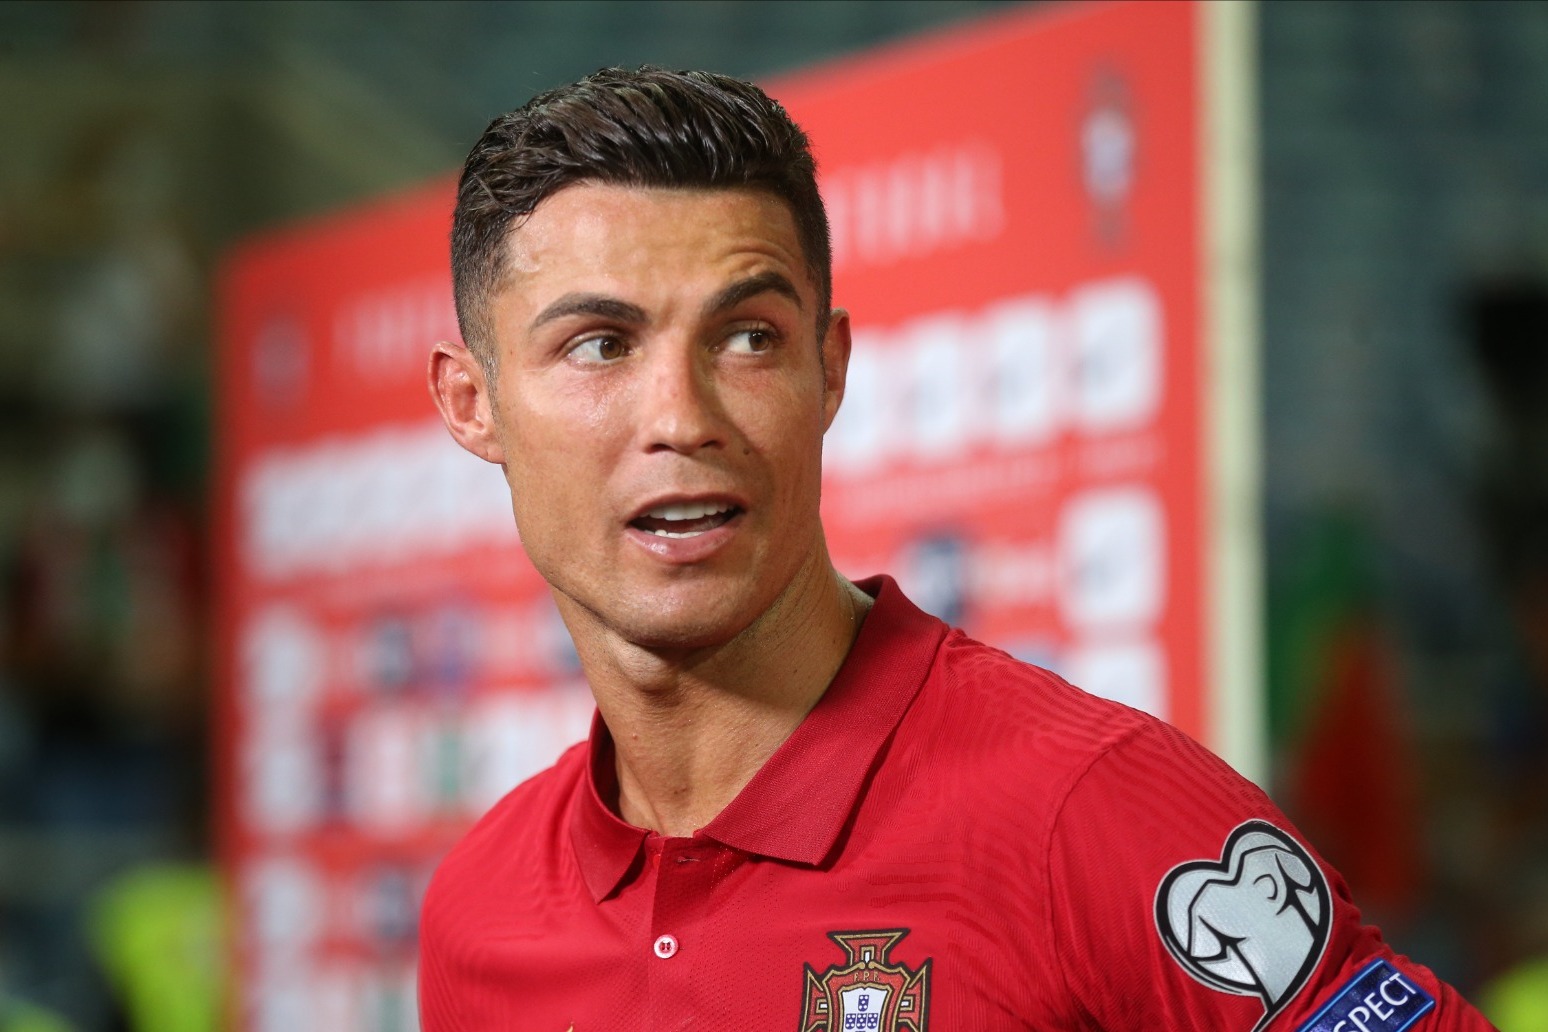 Cristiano Ronaldo claims he’s been ‘betrayed’ by Man Utd and is being forced out 